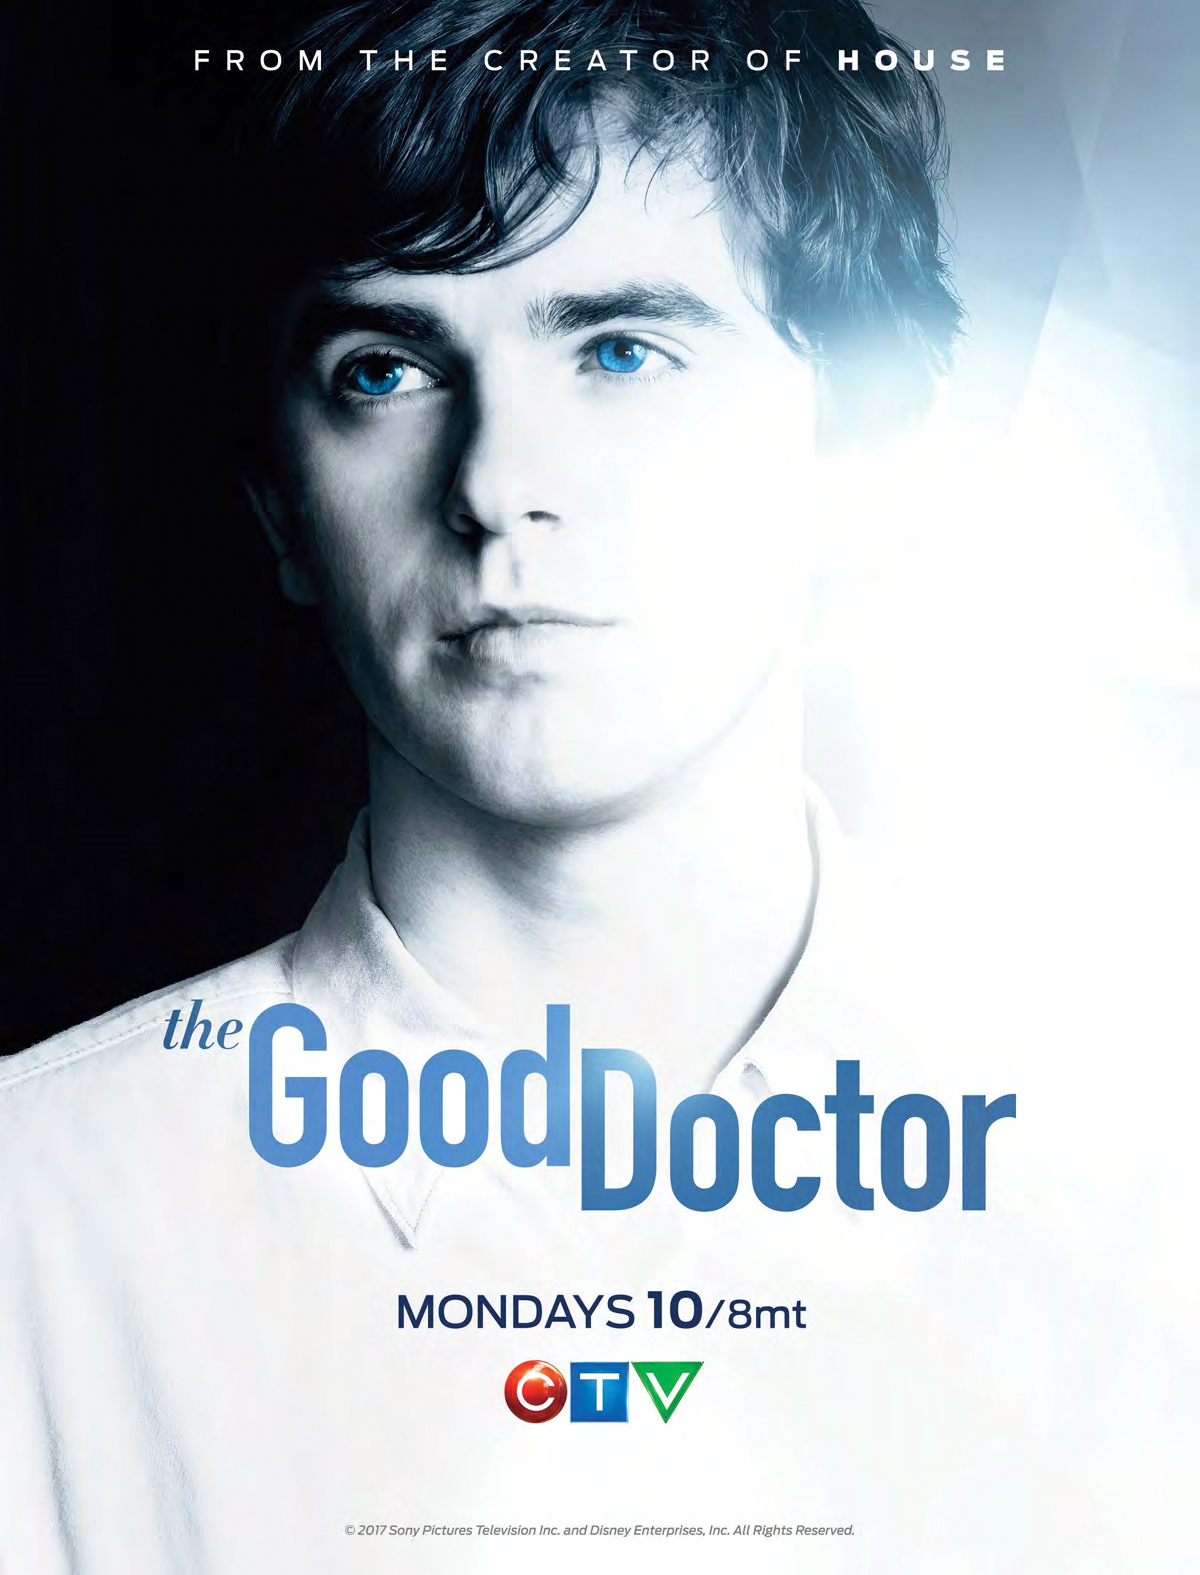 The good doctor free download halo 2 pc download reddit